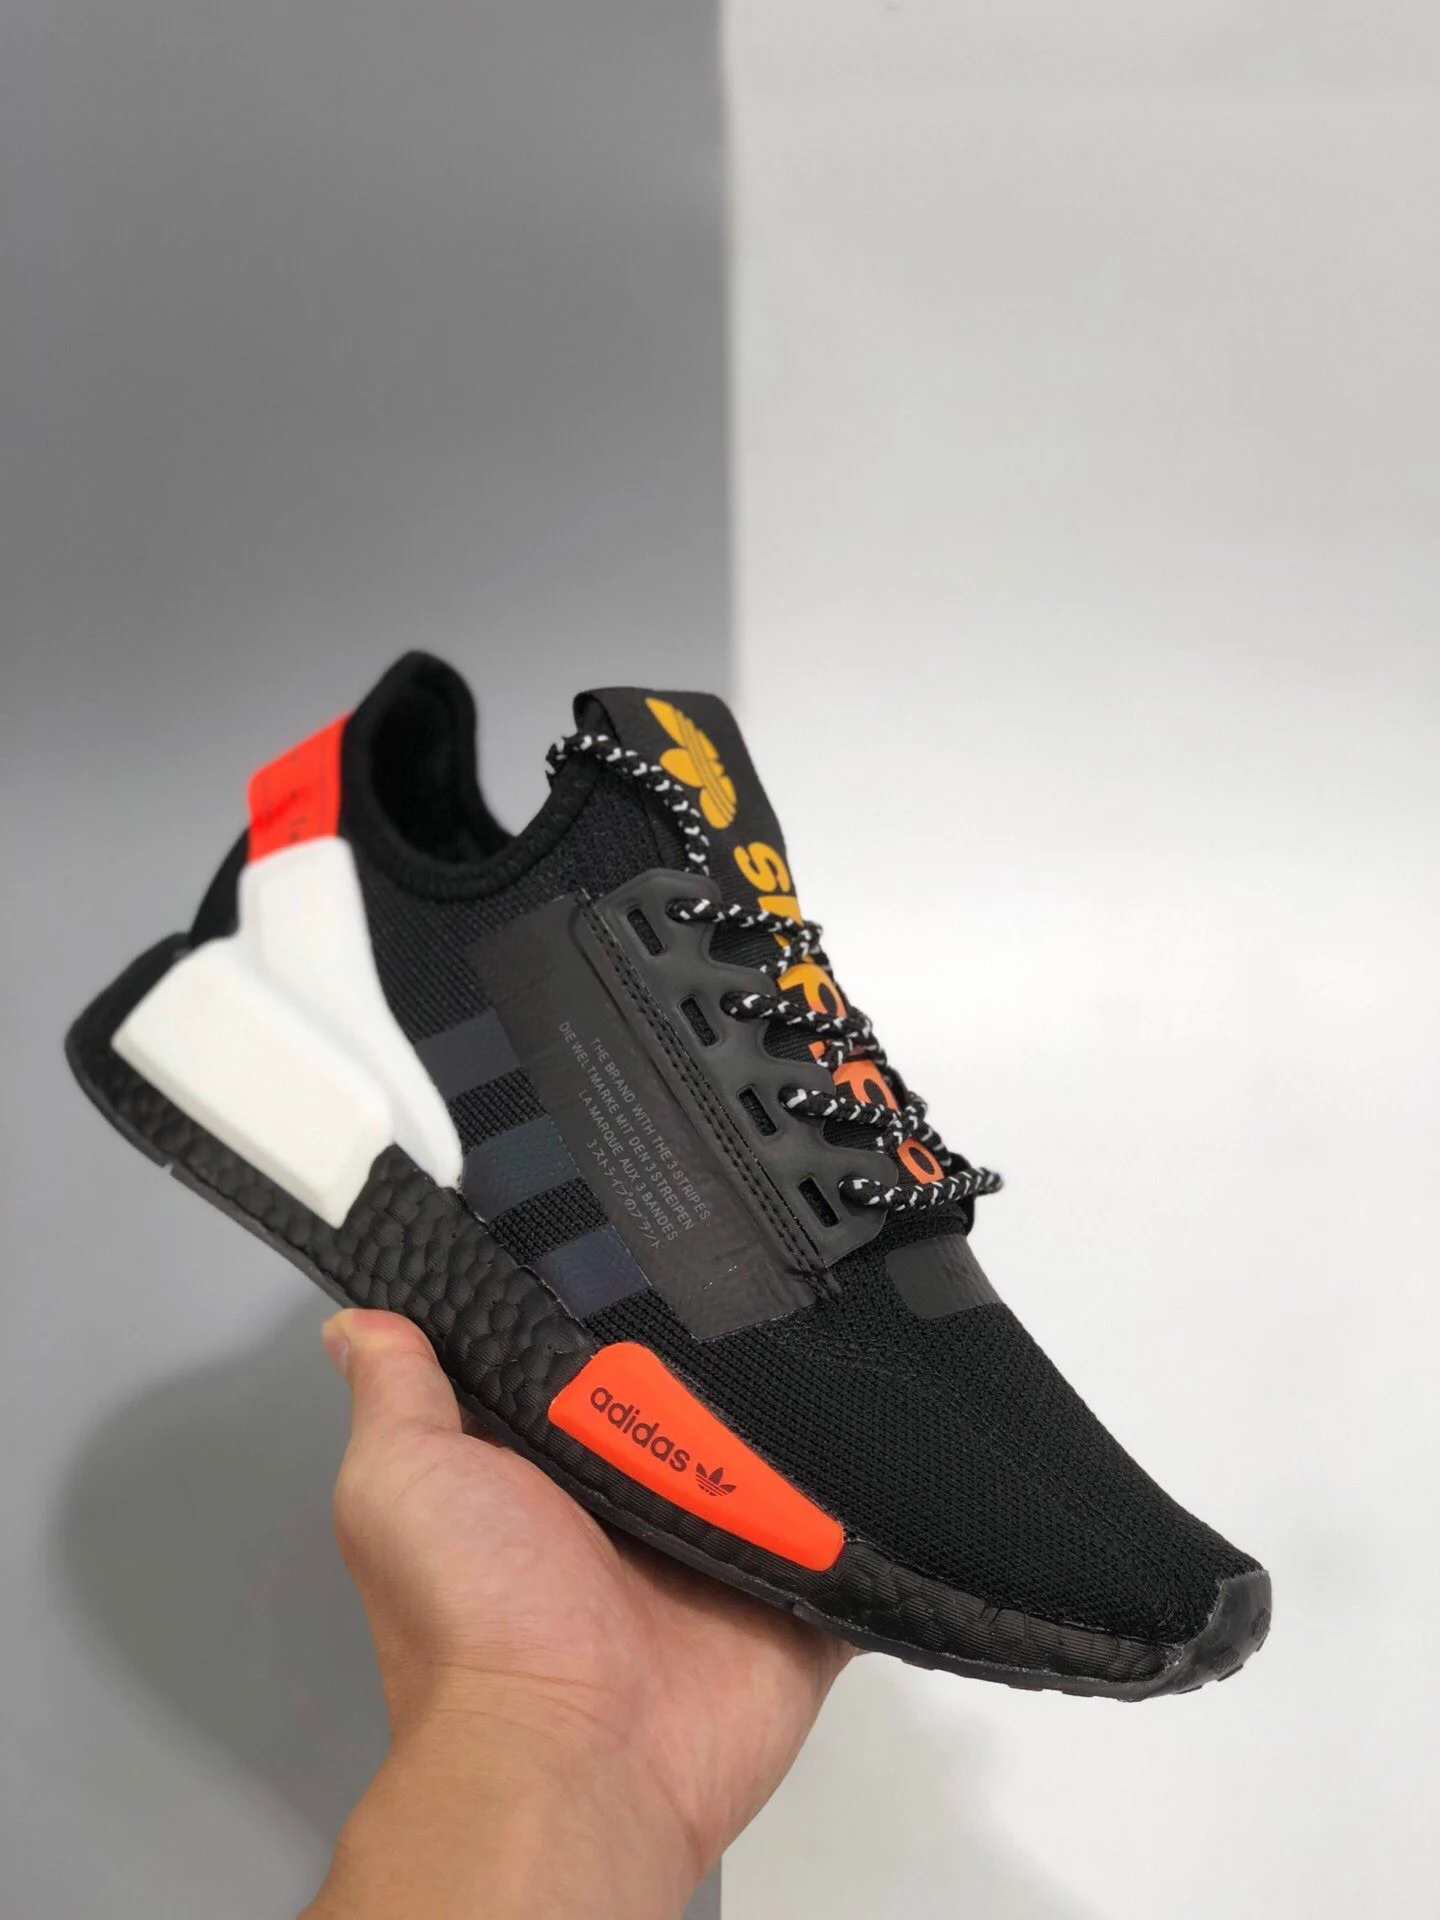 Adidas NMD R1 V2 Core Black Signal Coral FY3523 For Sale